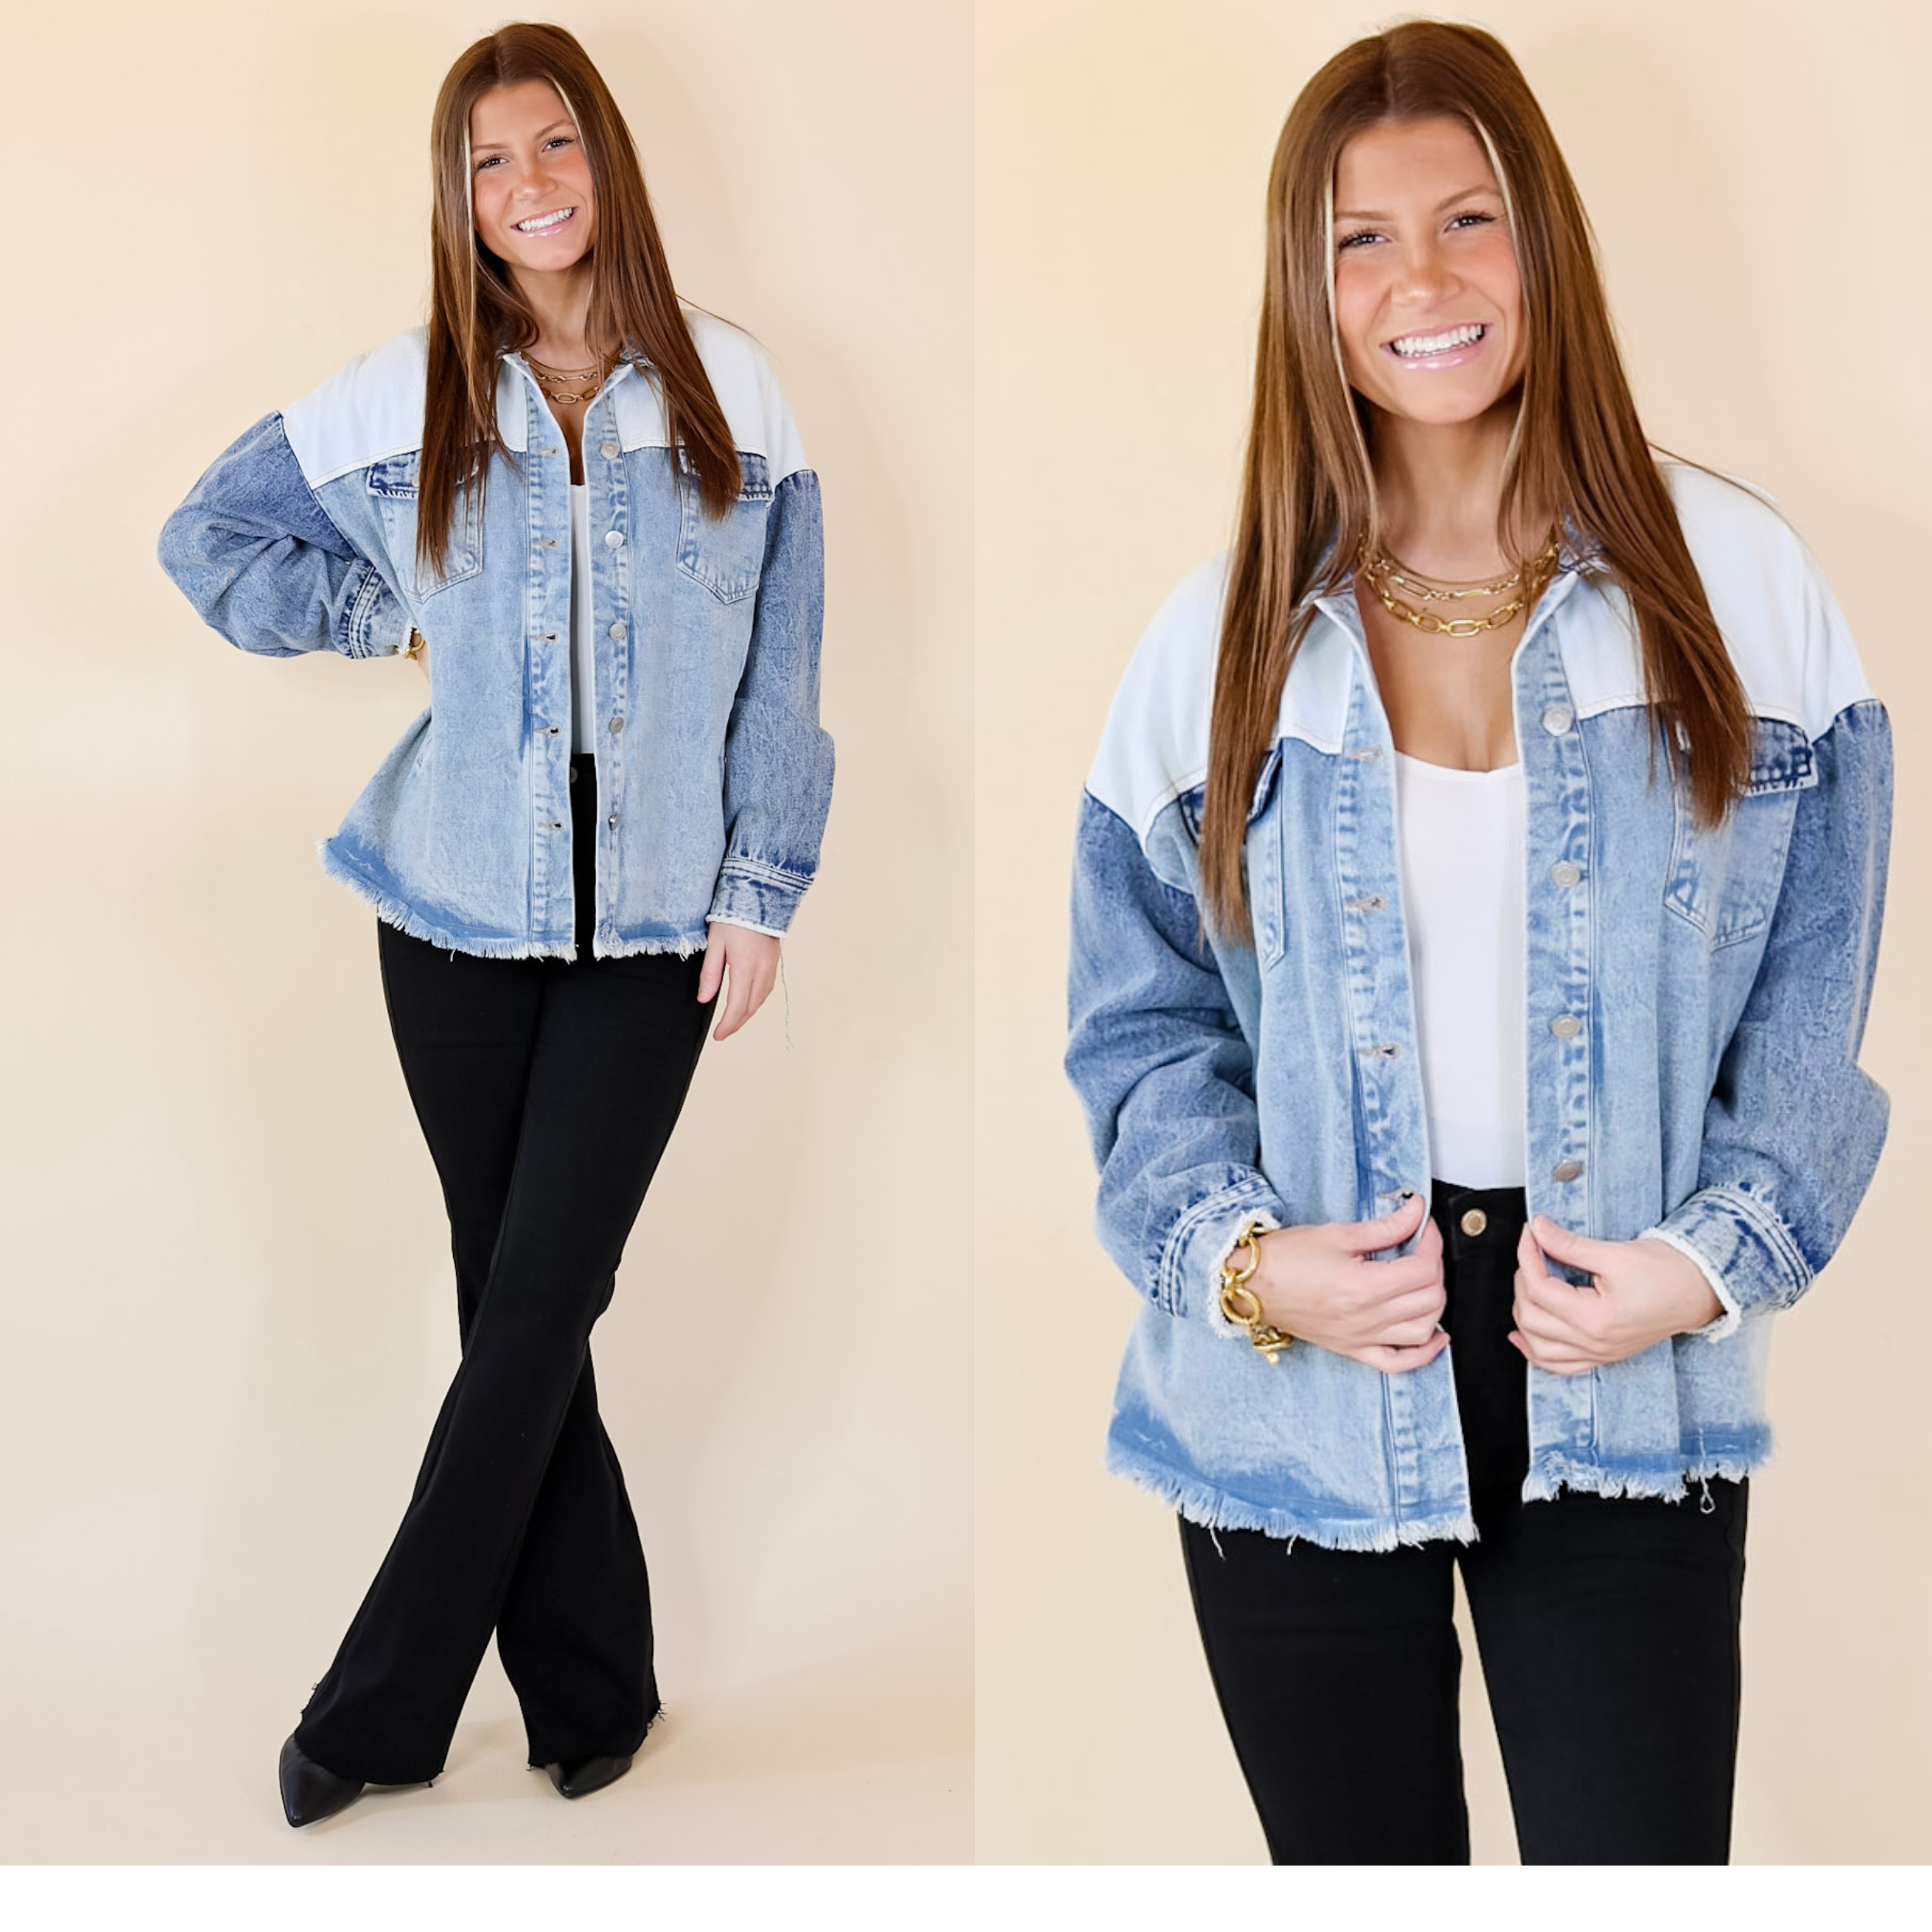 In the picture the model is wearing a color block button up jacket in denim with a white background